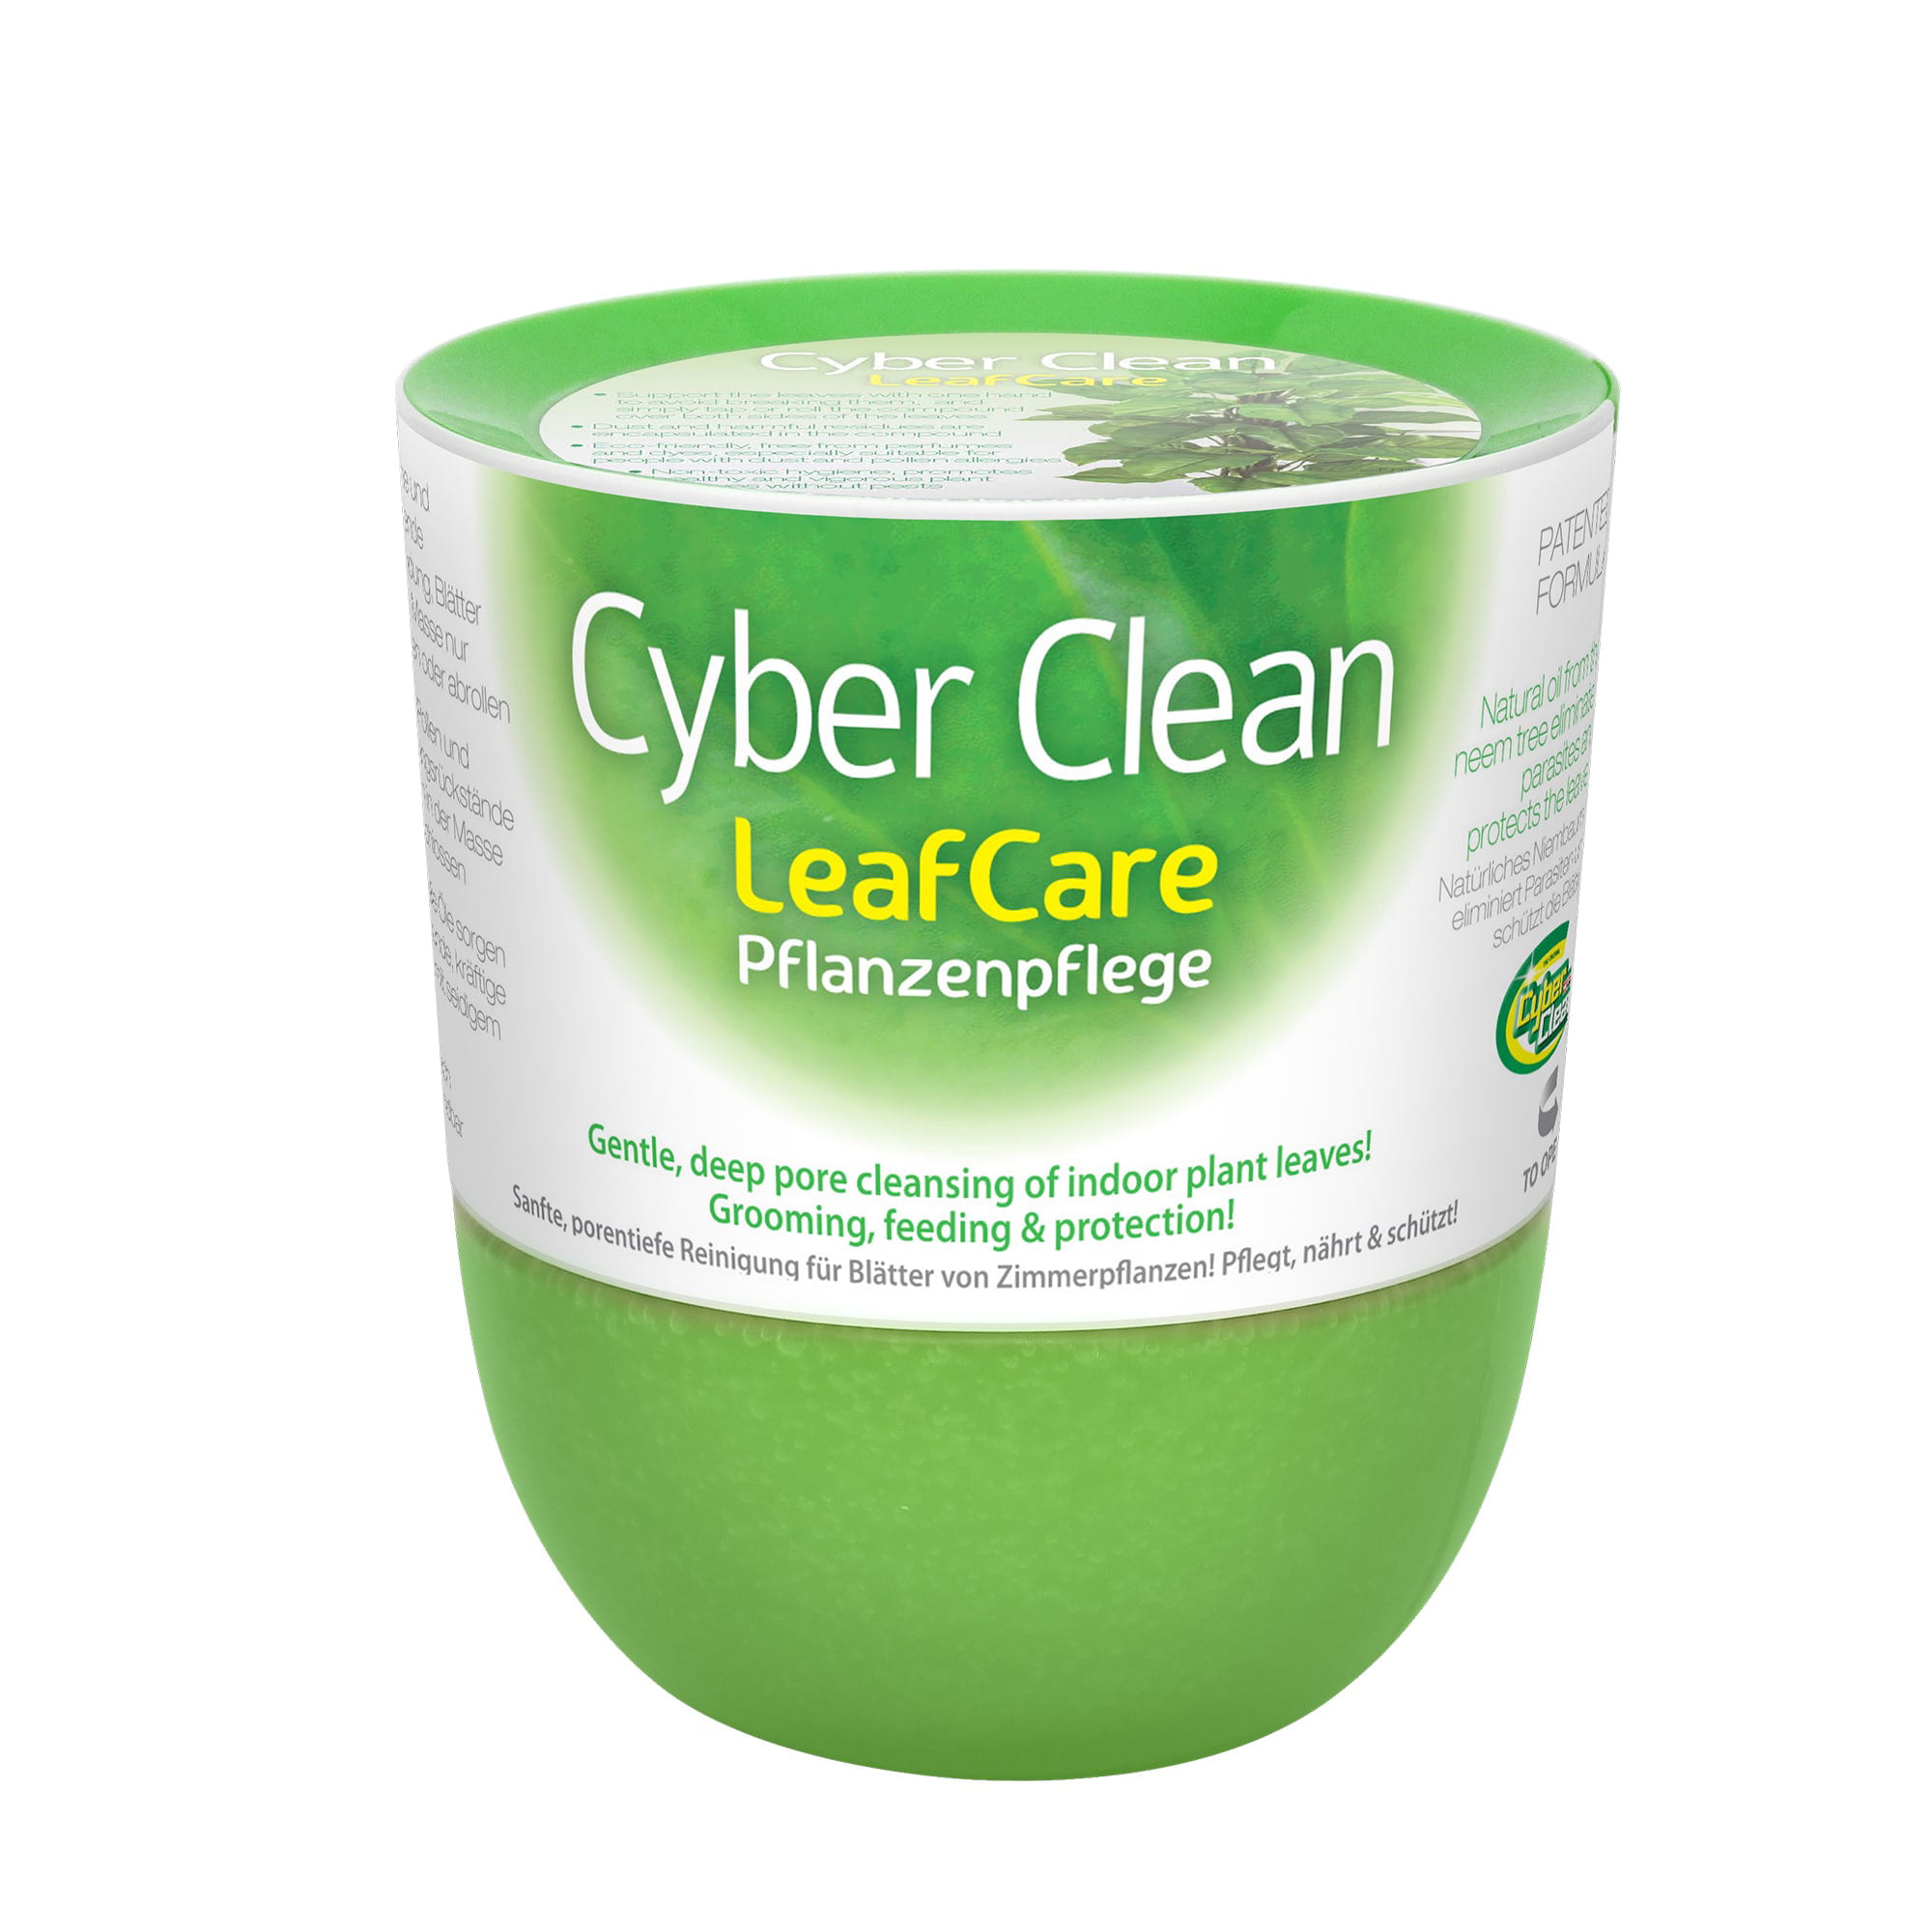 Cyber clean. Clean cup